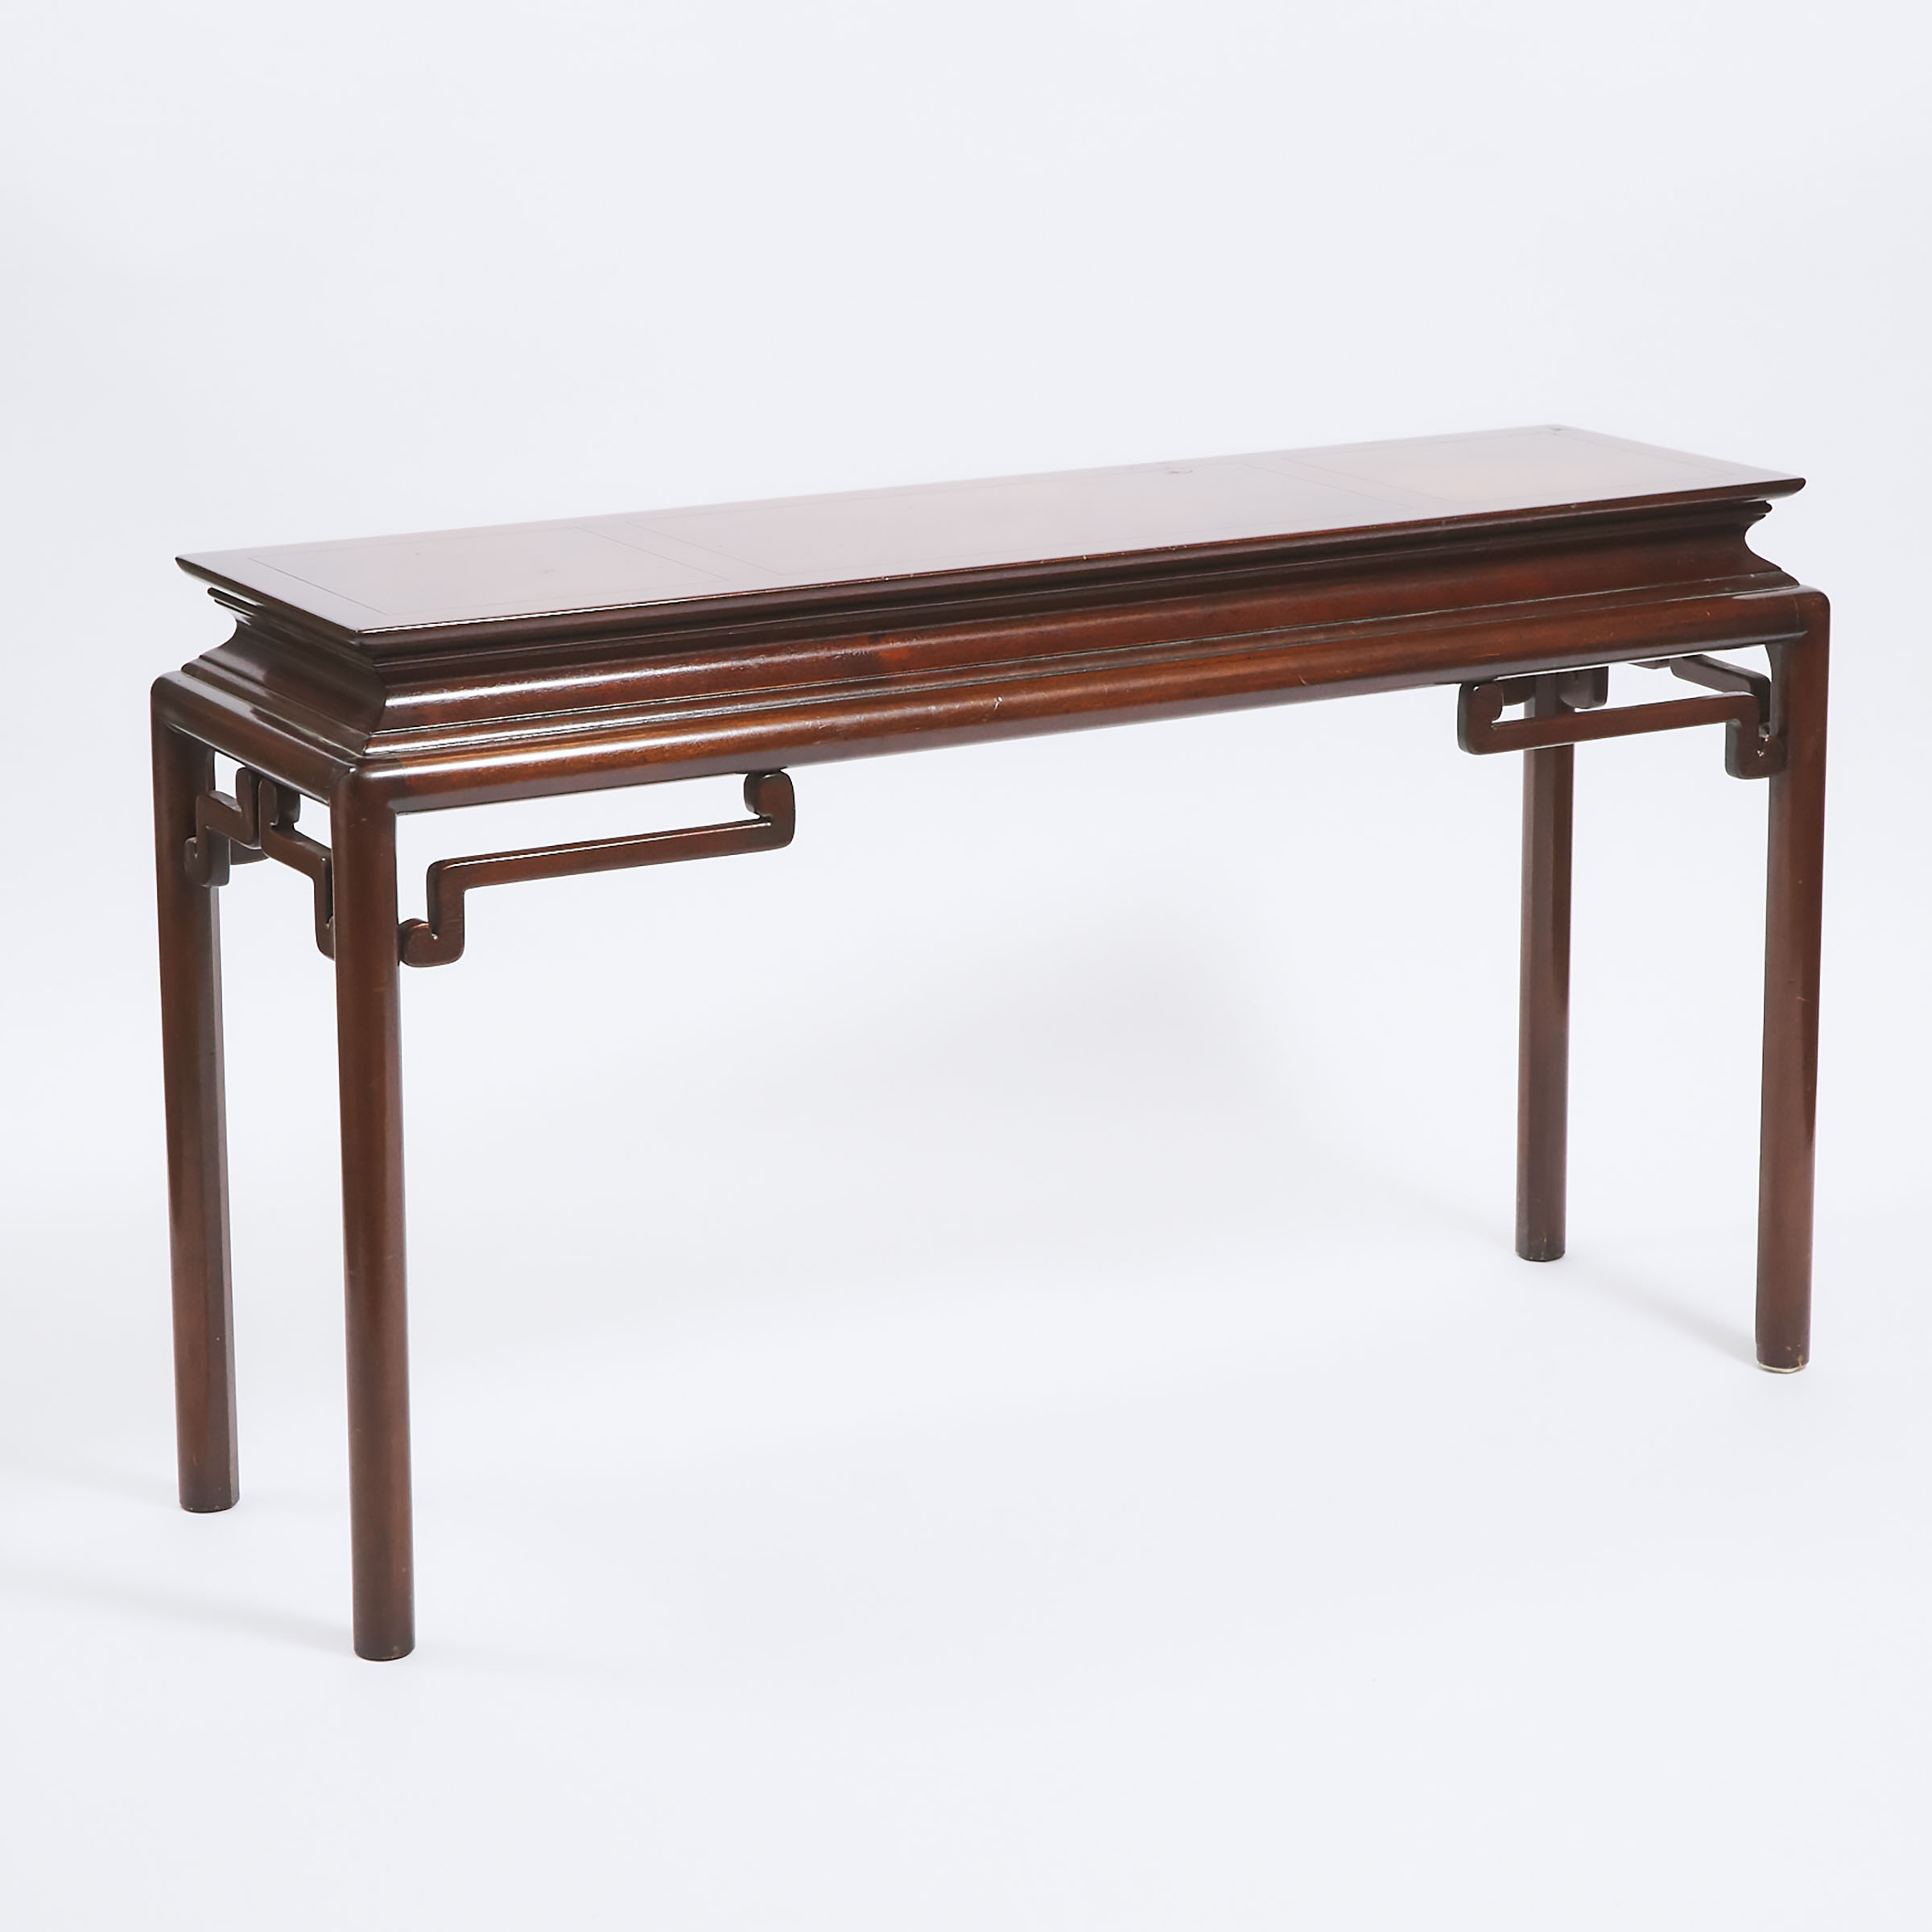 A Chinese Rosewood Altar Table, 19th/20th Century